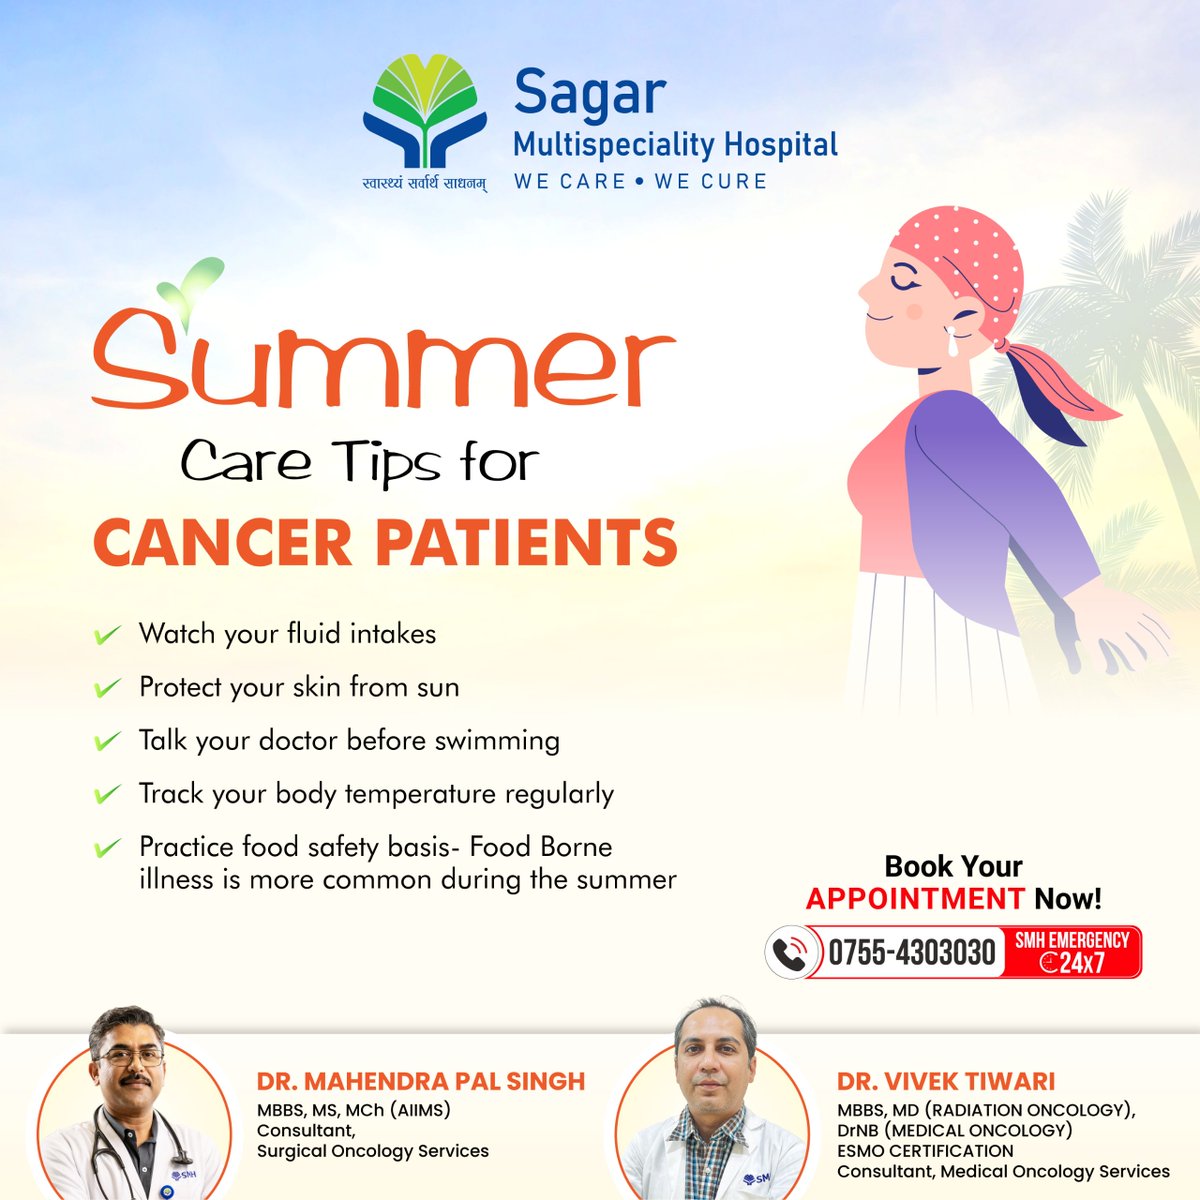 Summer Care Tips for Cancer Patients

-Watch your fluid intakes
-Protect your skin from sun
-Talk to your doctor before swimming
-Track your body temperature regularly
-Practice food safety basis- Food Borne illness is more common during the summer
#india #patient #doctor